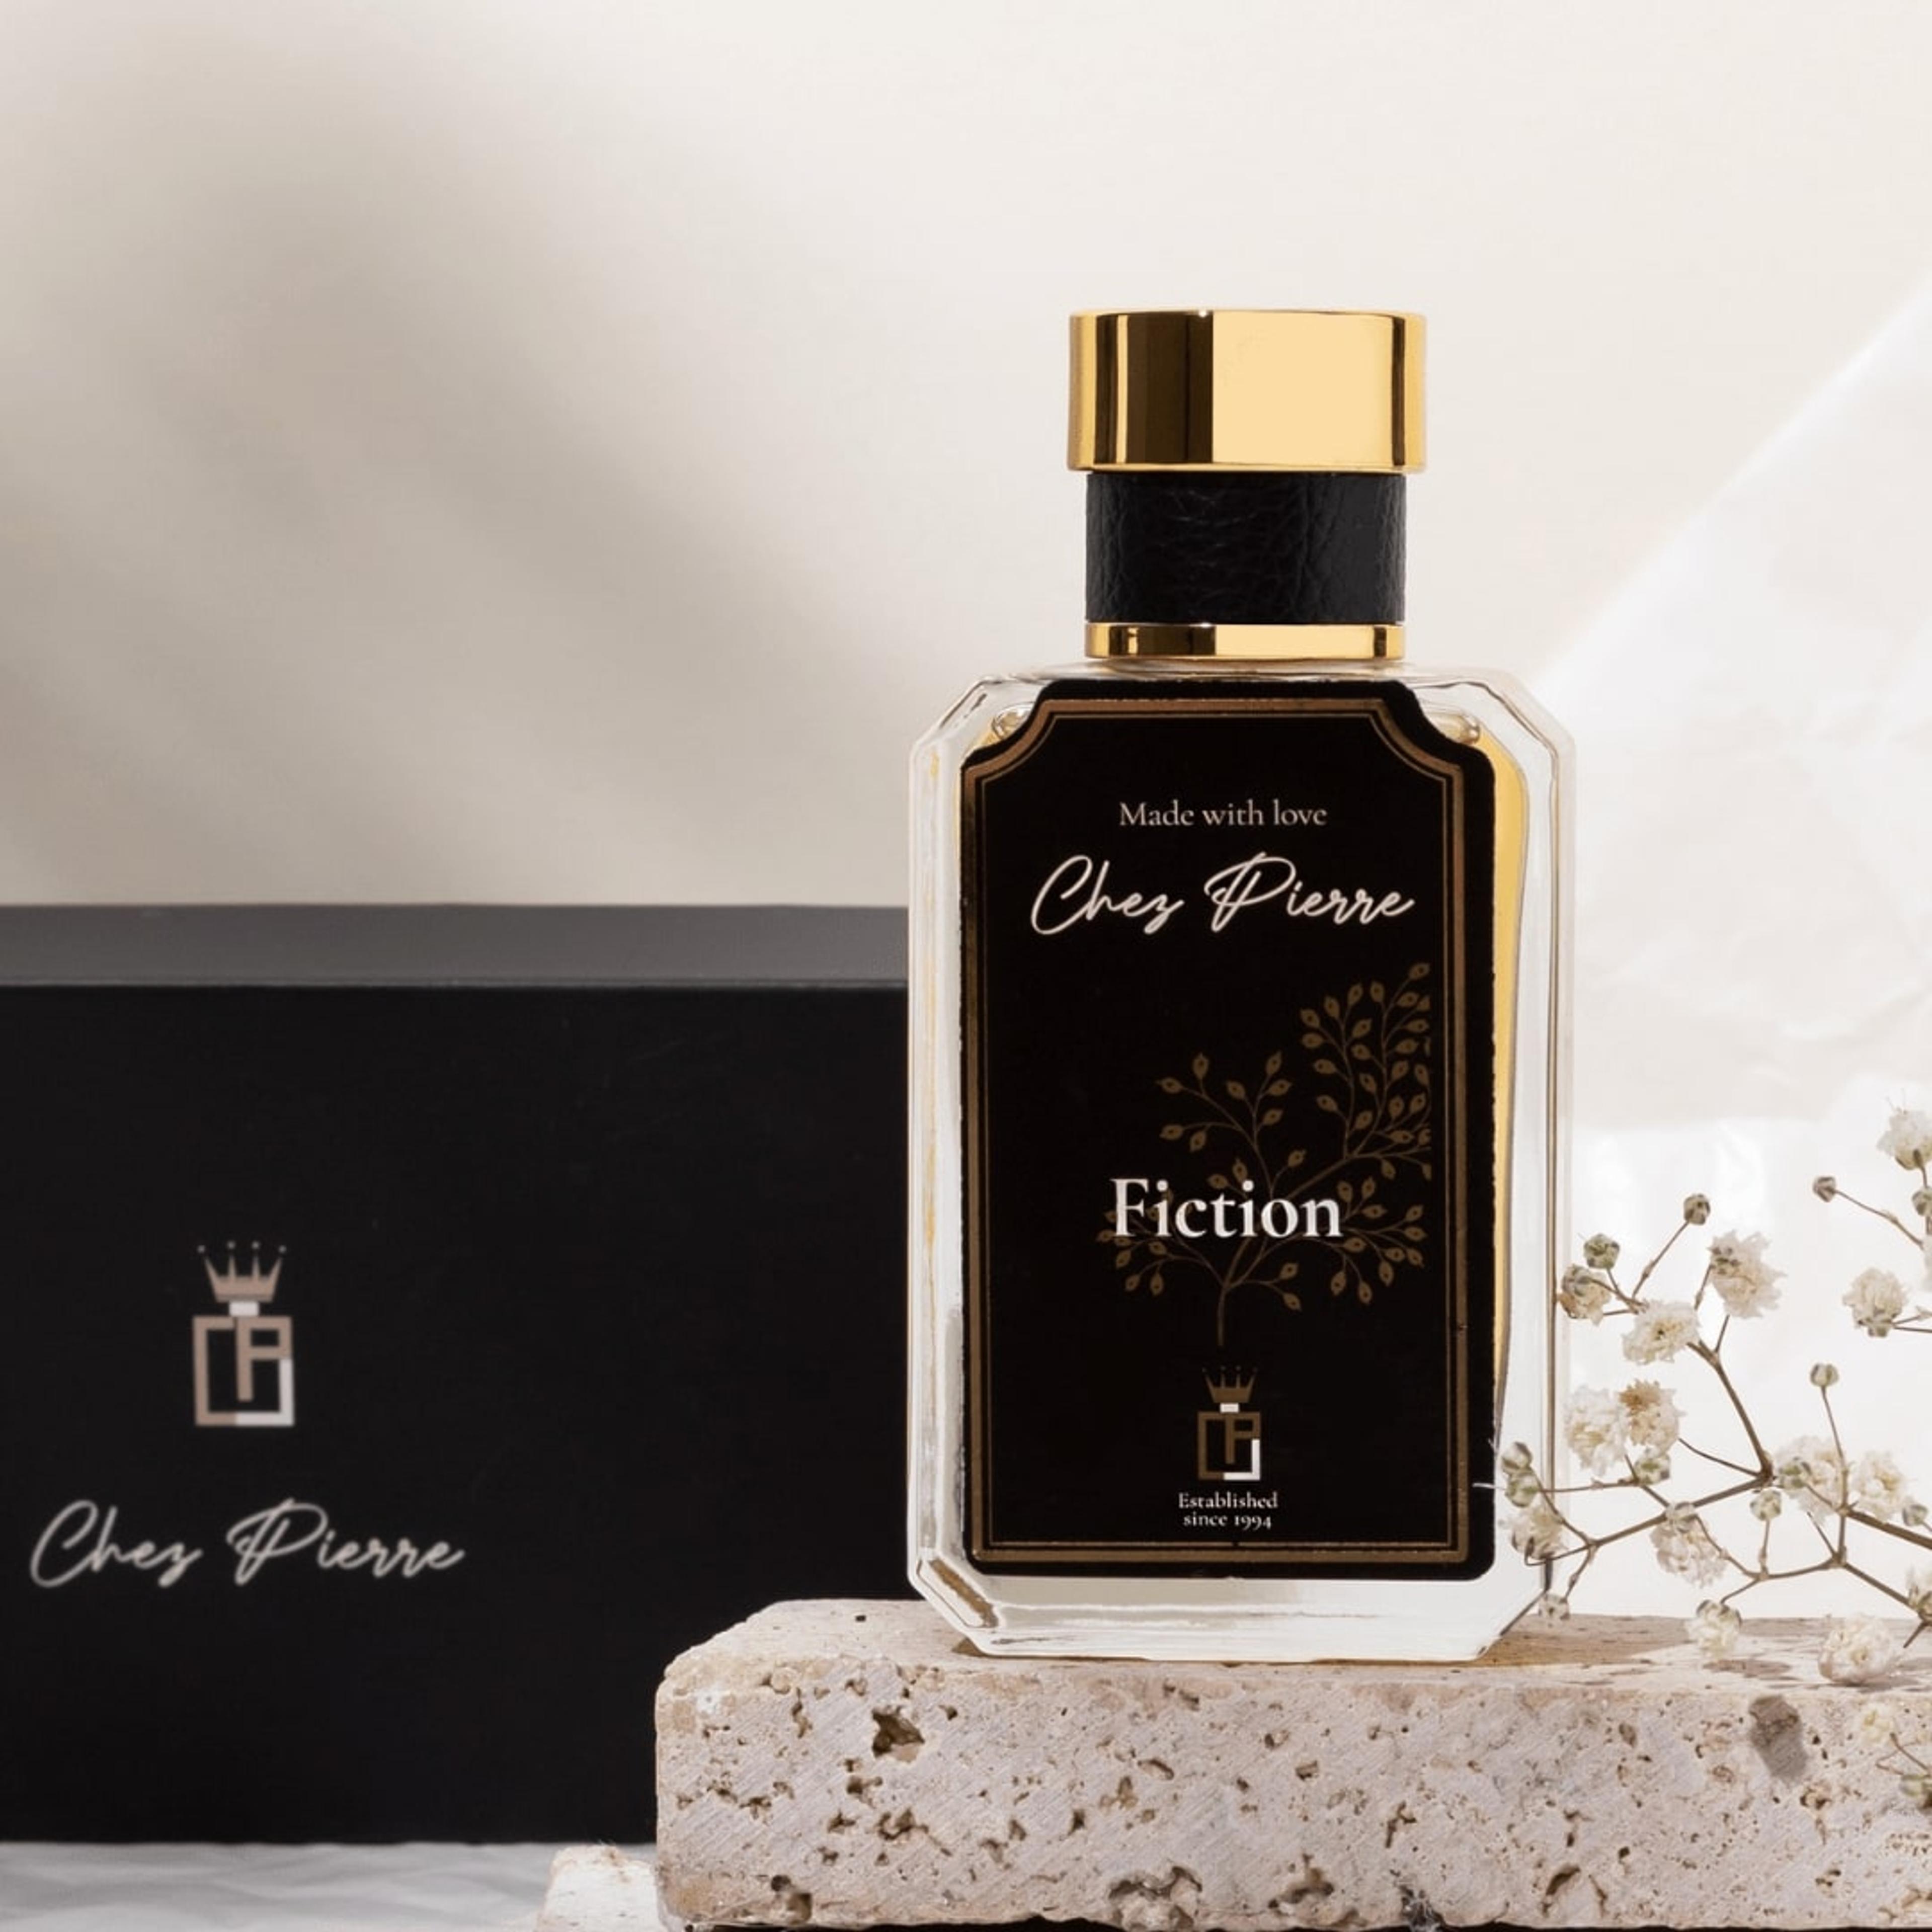 Chez Pierre's Fiction Perfume Inspired By Lost Cherry